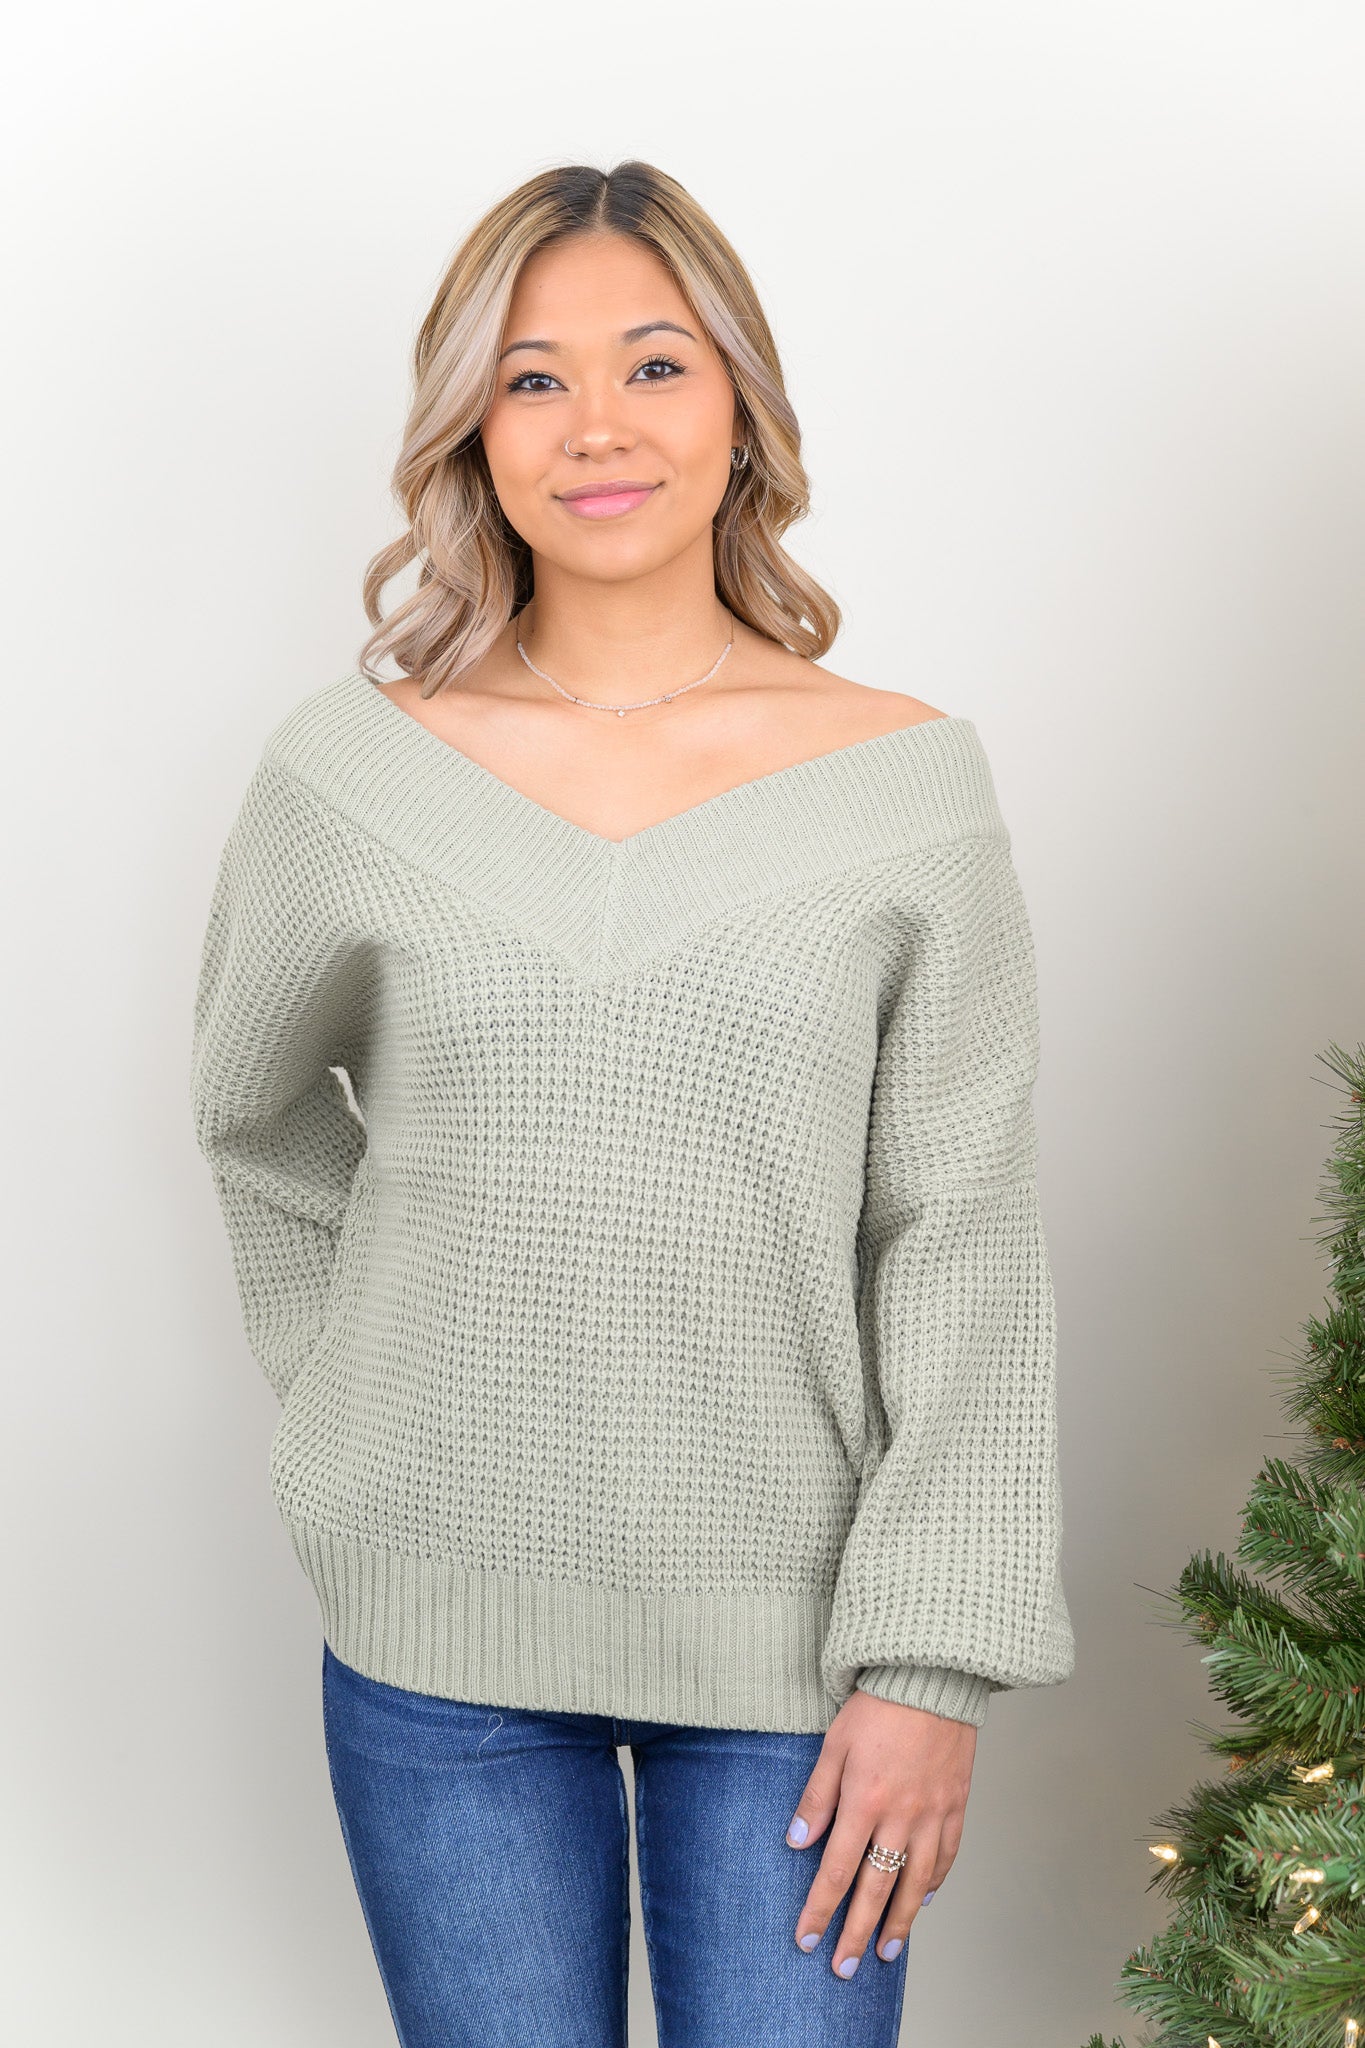 Our Love and Adored Sweater is the perfect casual top for every day wear. It features a deep V-neckline for off the shoulder wear, and a chunky knit material to keep you warm all winter long!